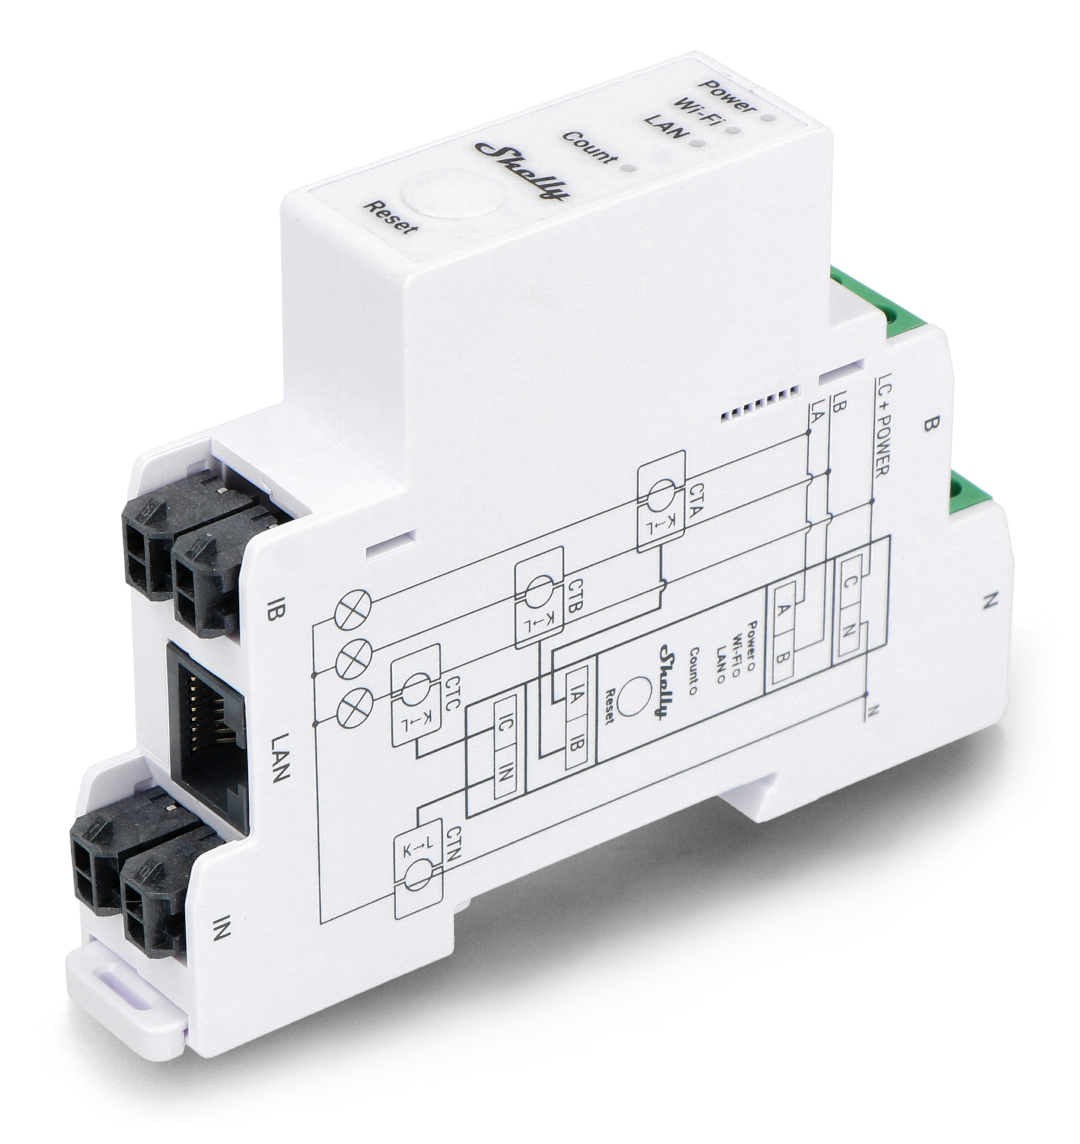 Shelly 2.5 UL: Compact Dual Relay Smart Switch with Energy Monitoring and